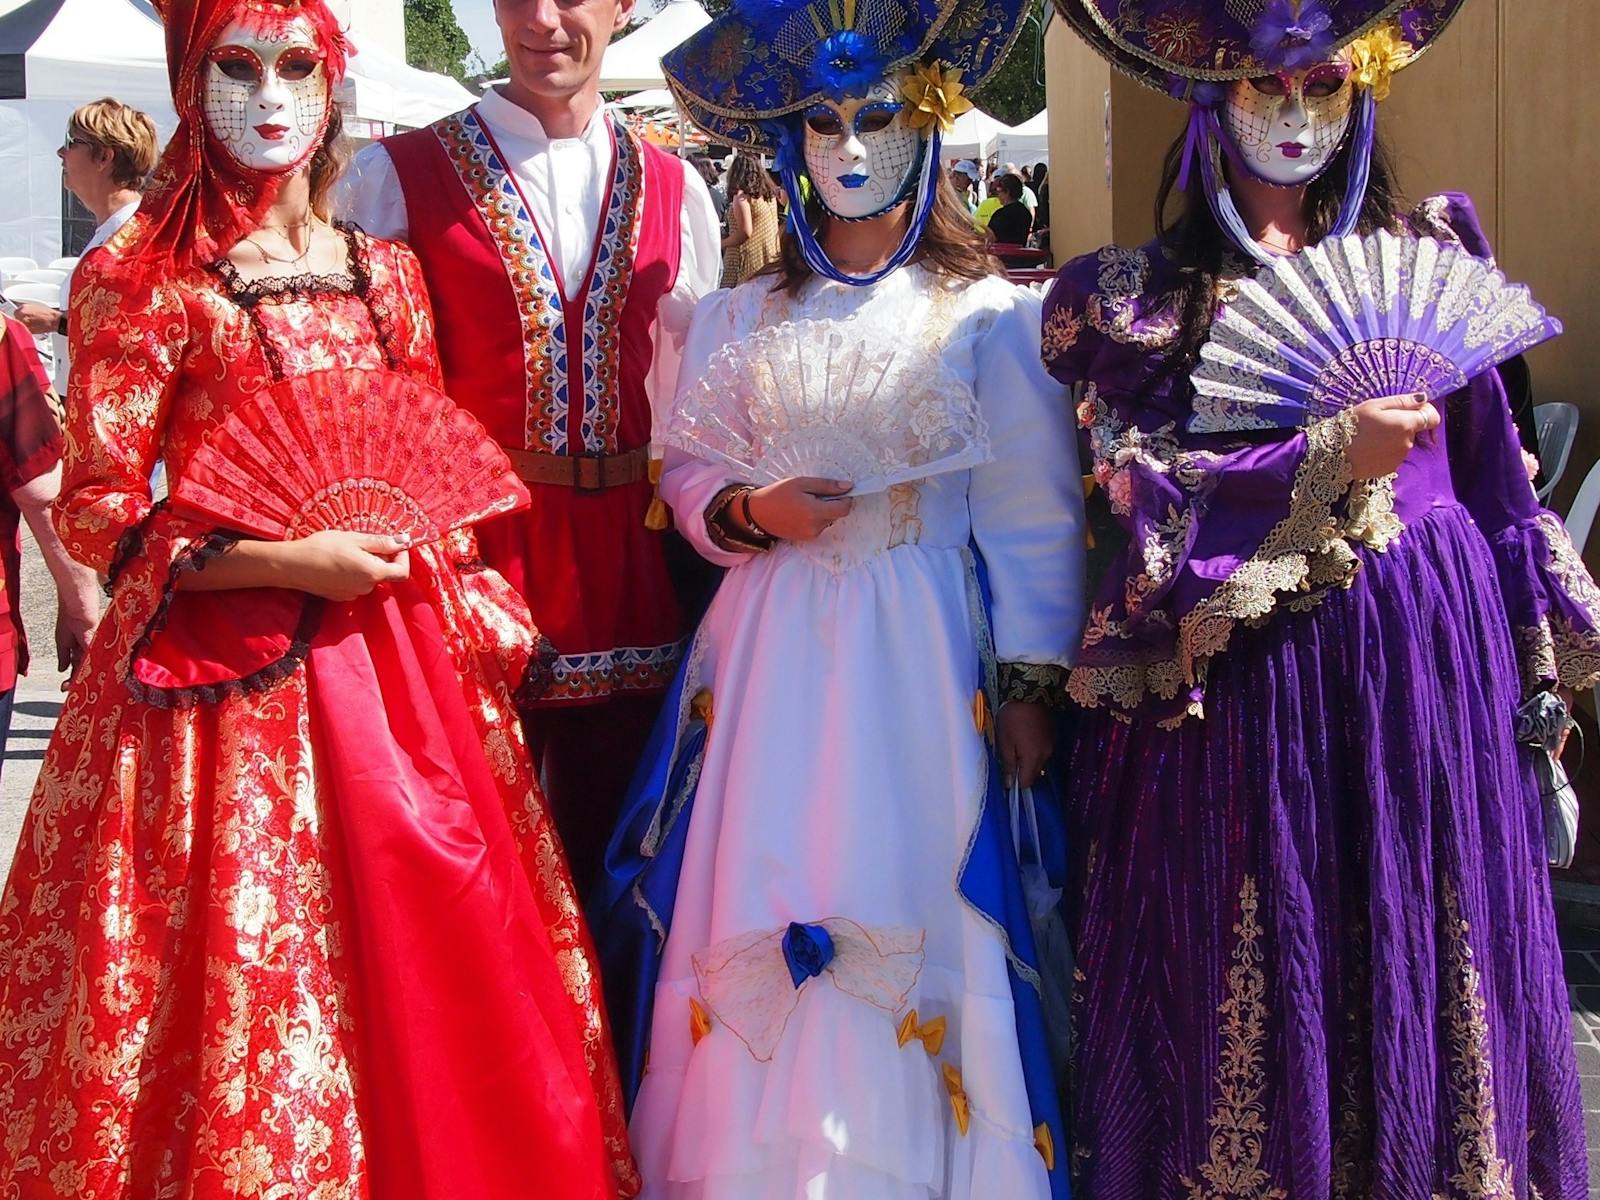 Typical Venetian costumes are amongst many of the traditions on display